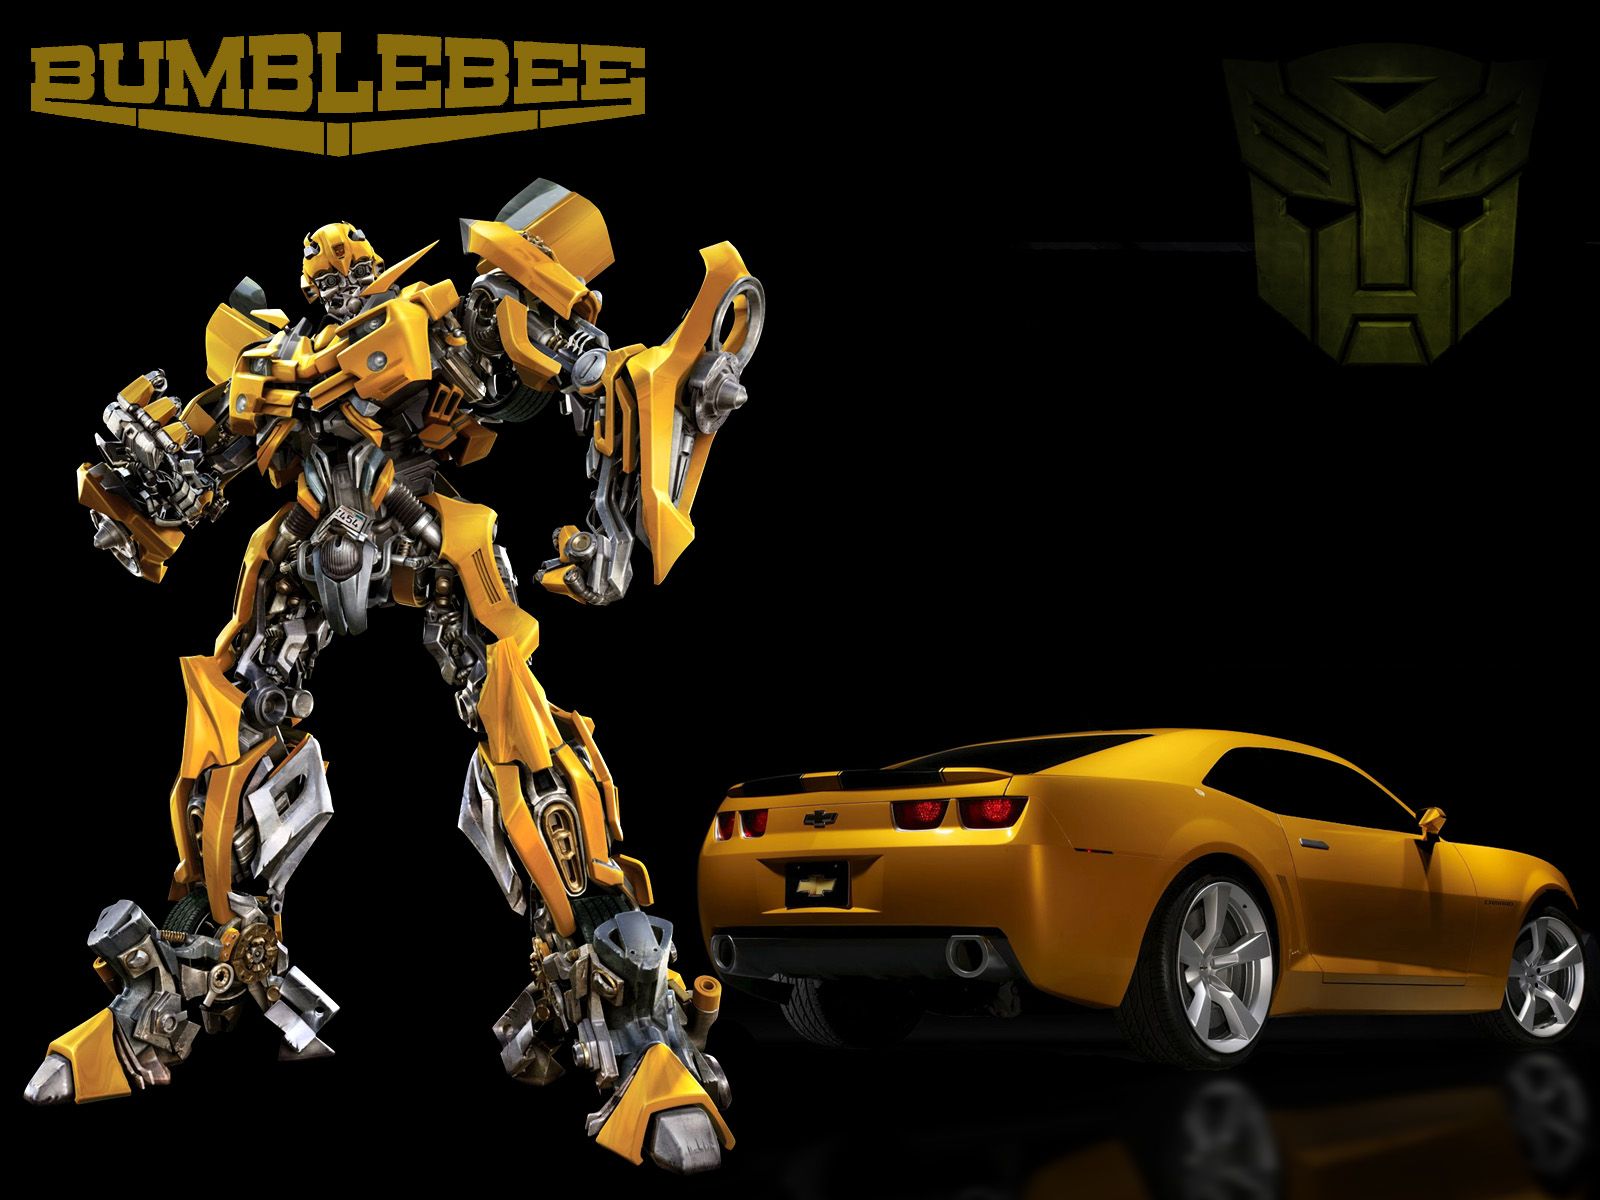 Bumblebee From Transformers Movie wallpaper | It's All a Fantasy ...